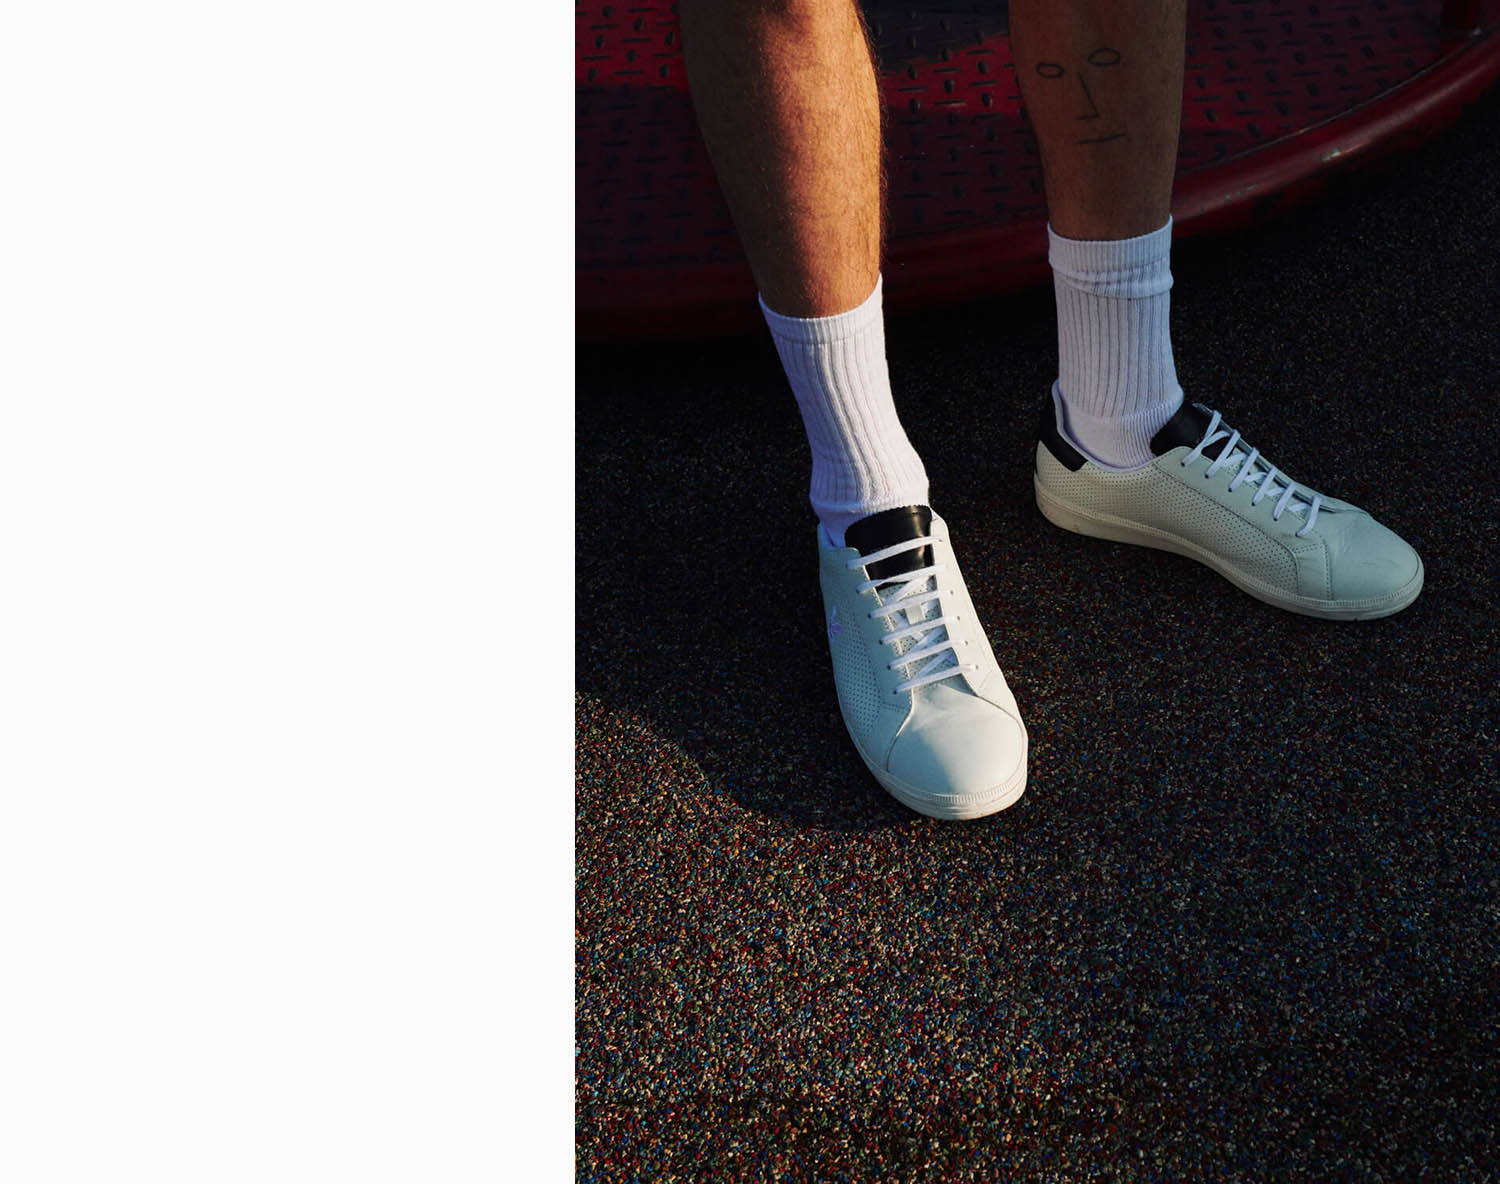  Lyle and Scott  trainers by  lifestyle photographer Tim Cole